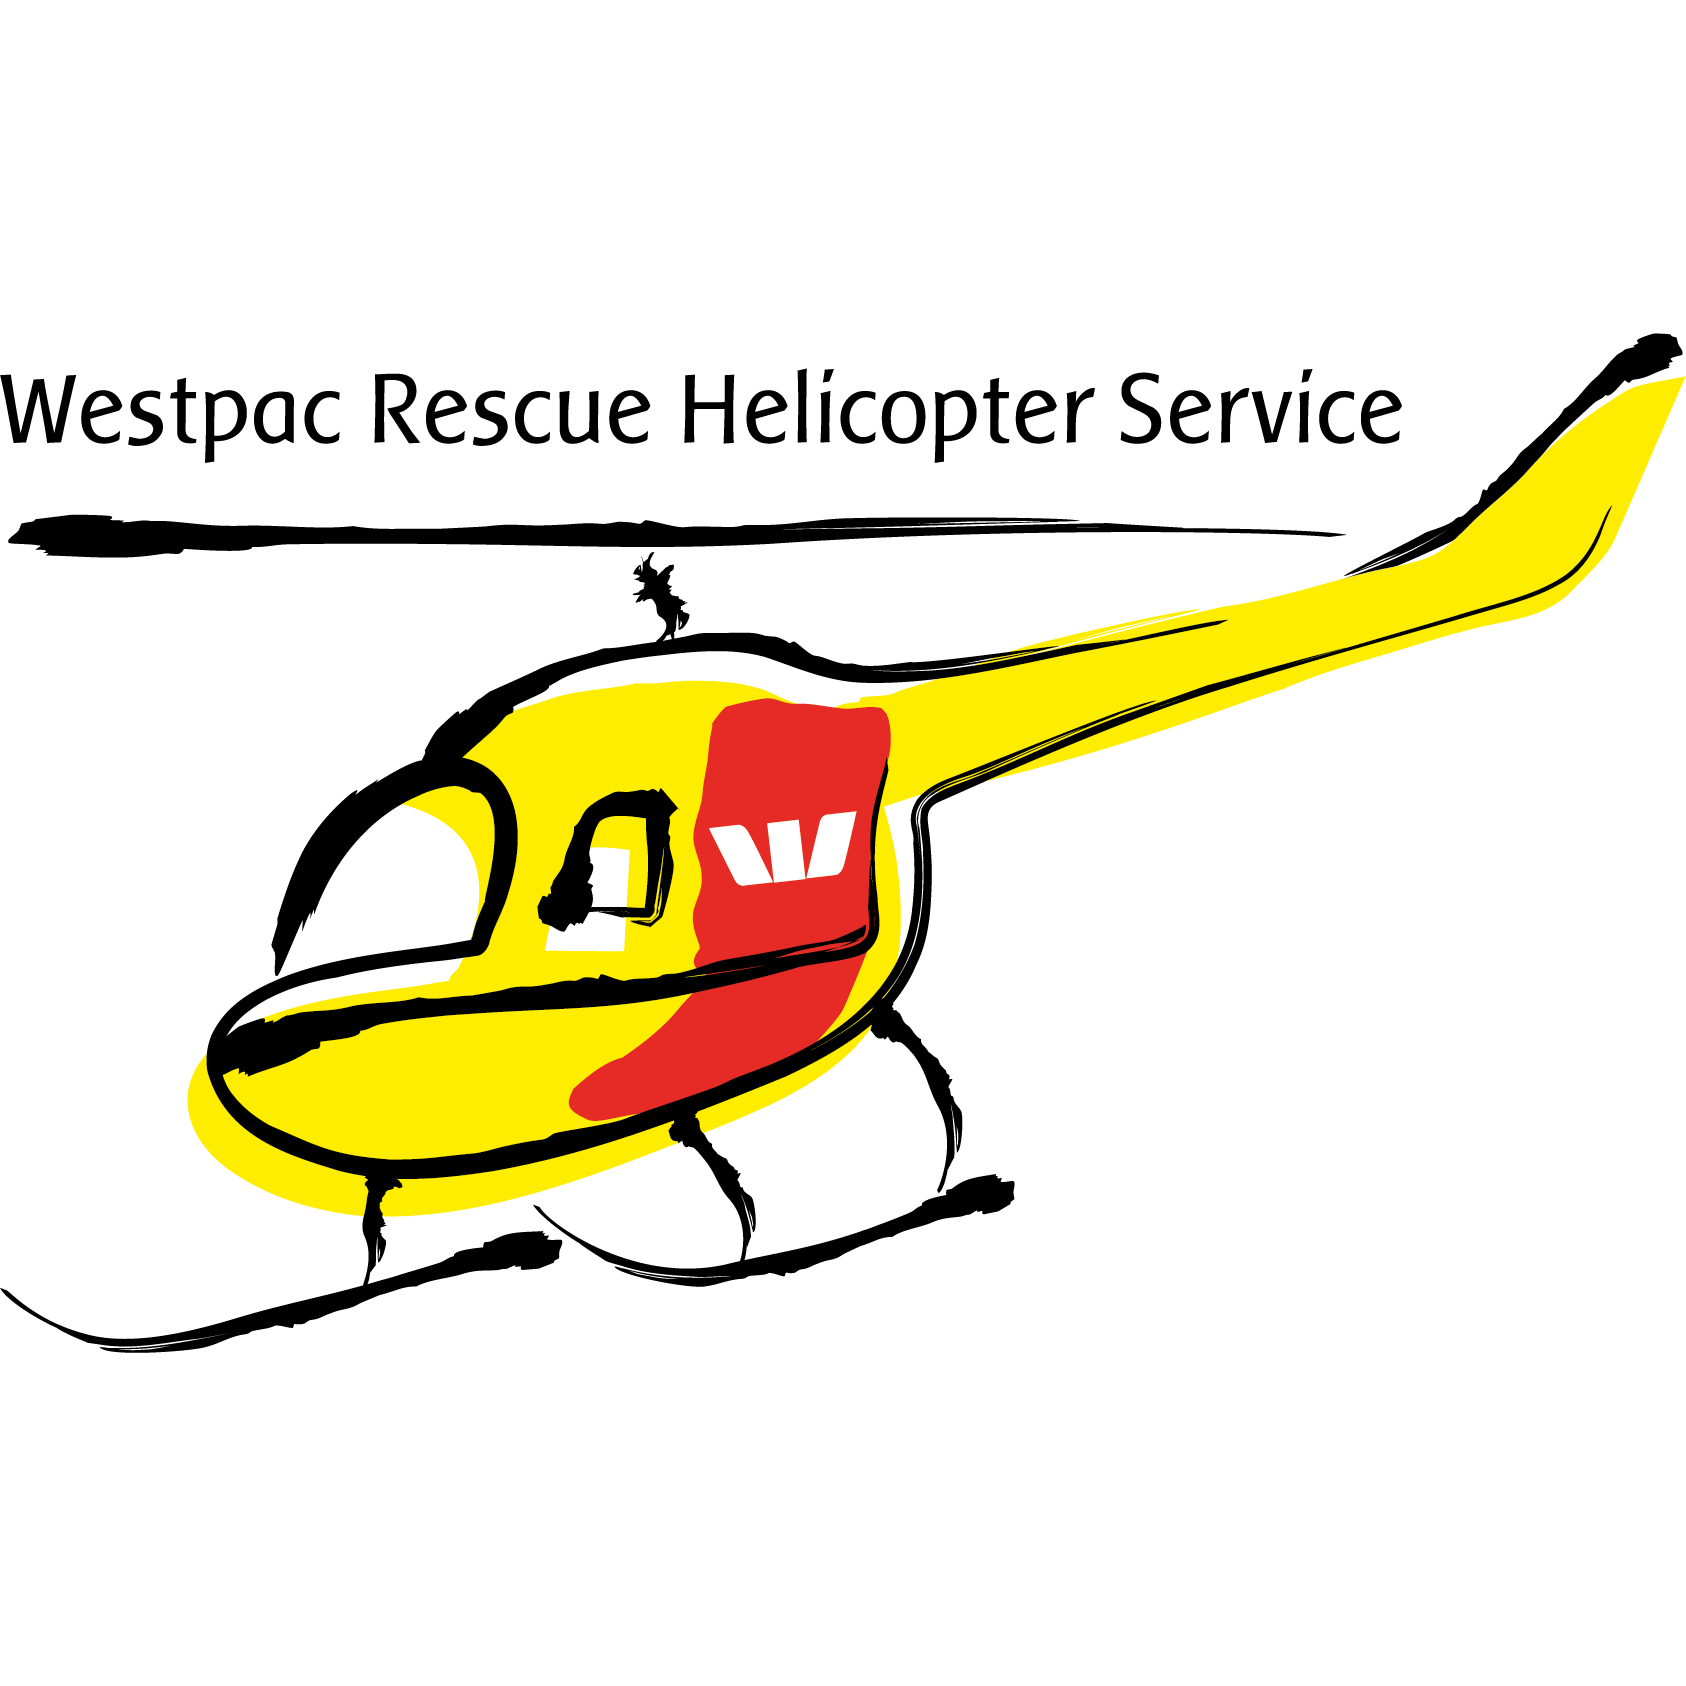 Westpac Rescue Helicopter Service Logo